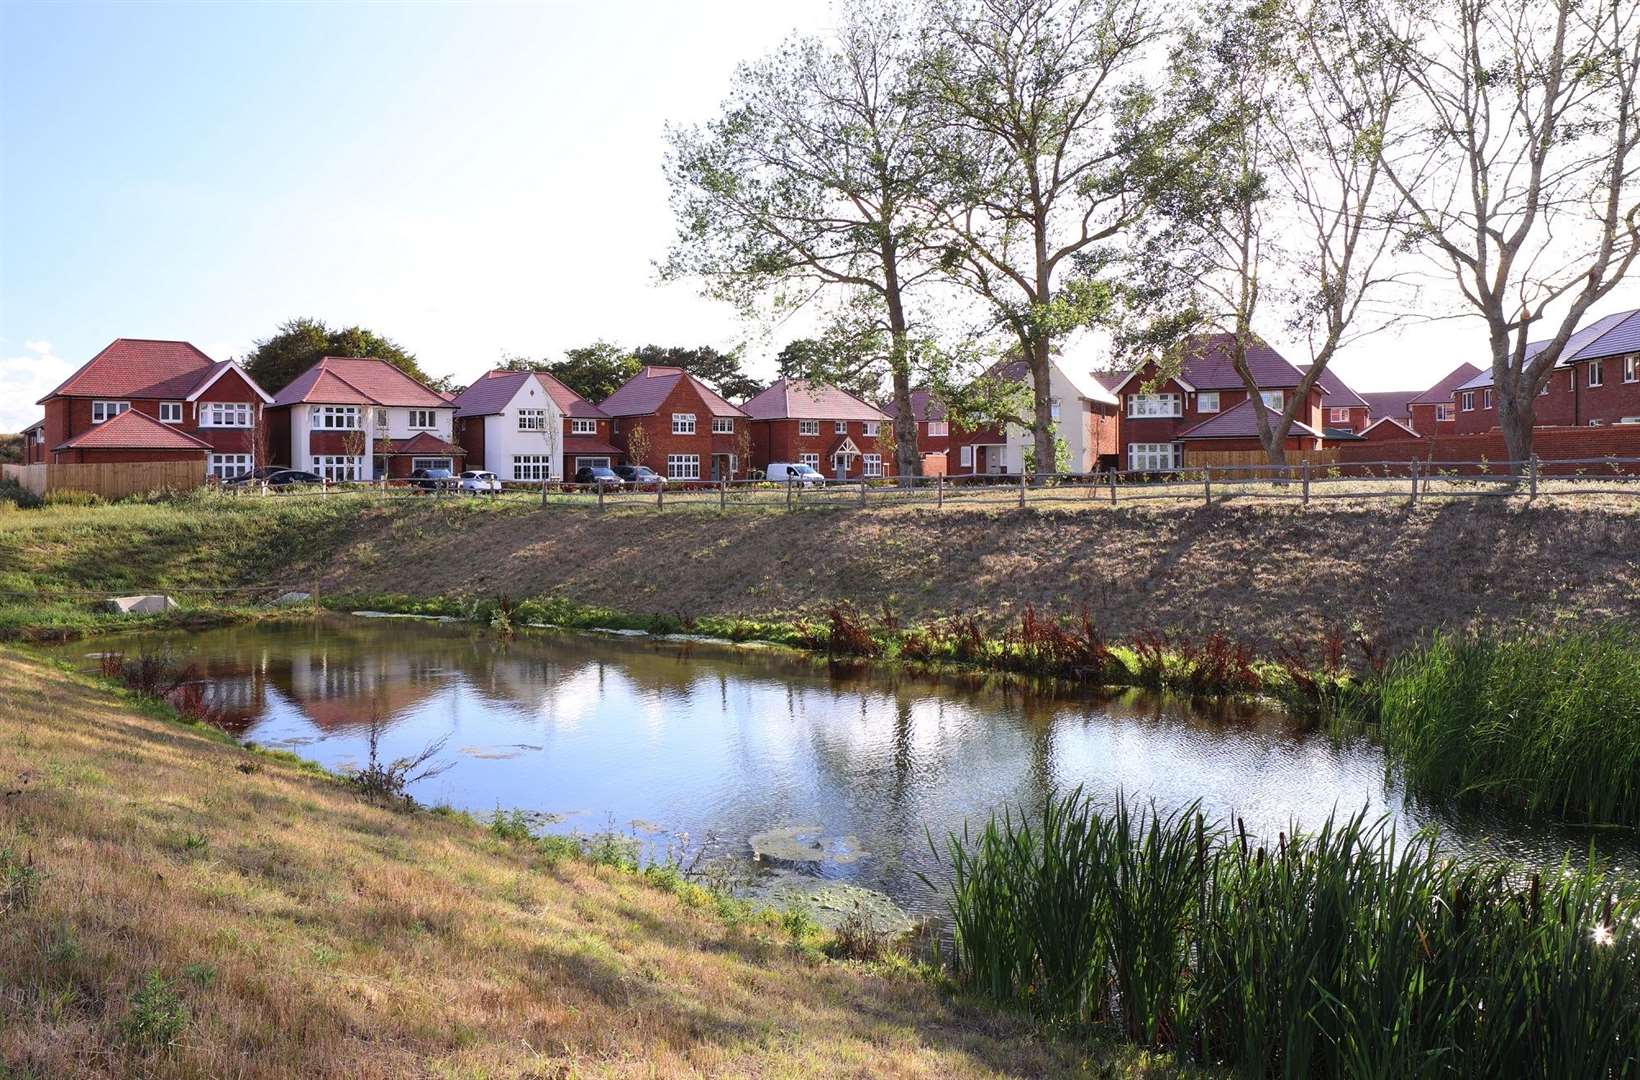 Redrow has sold 266 of the 568 homes due to be built across the former Herne Bay golf course site. Picture: Redrow